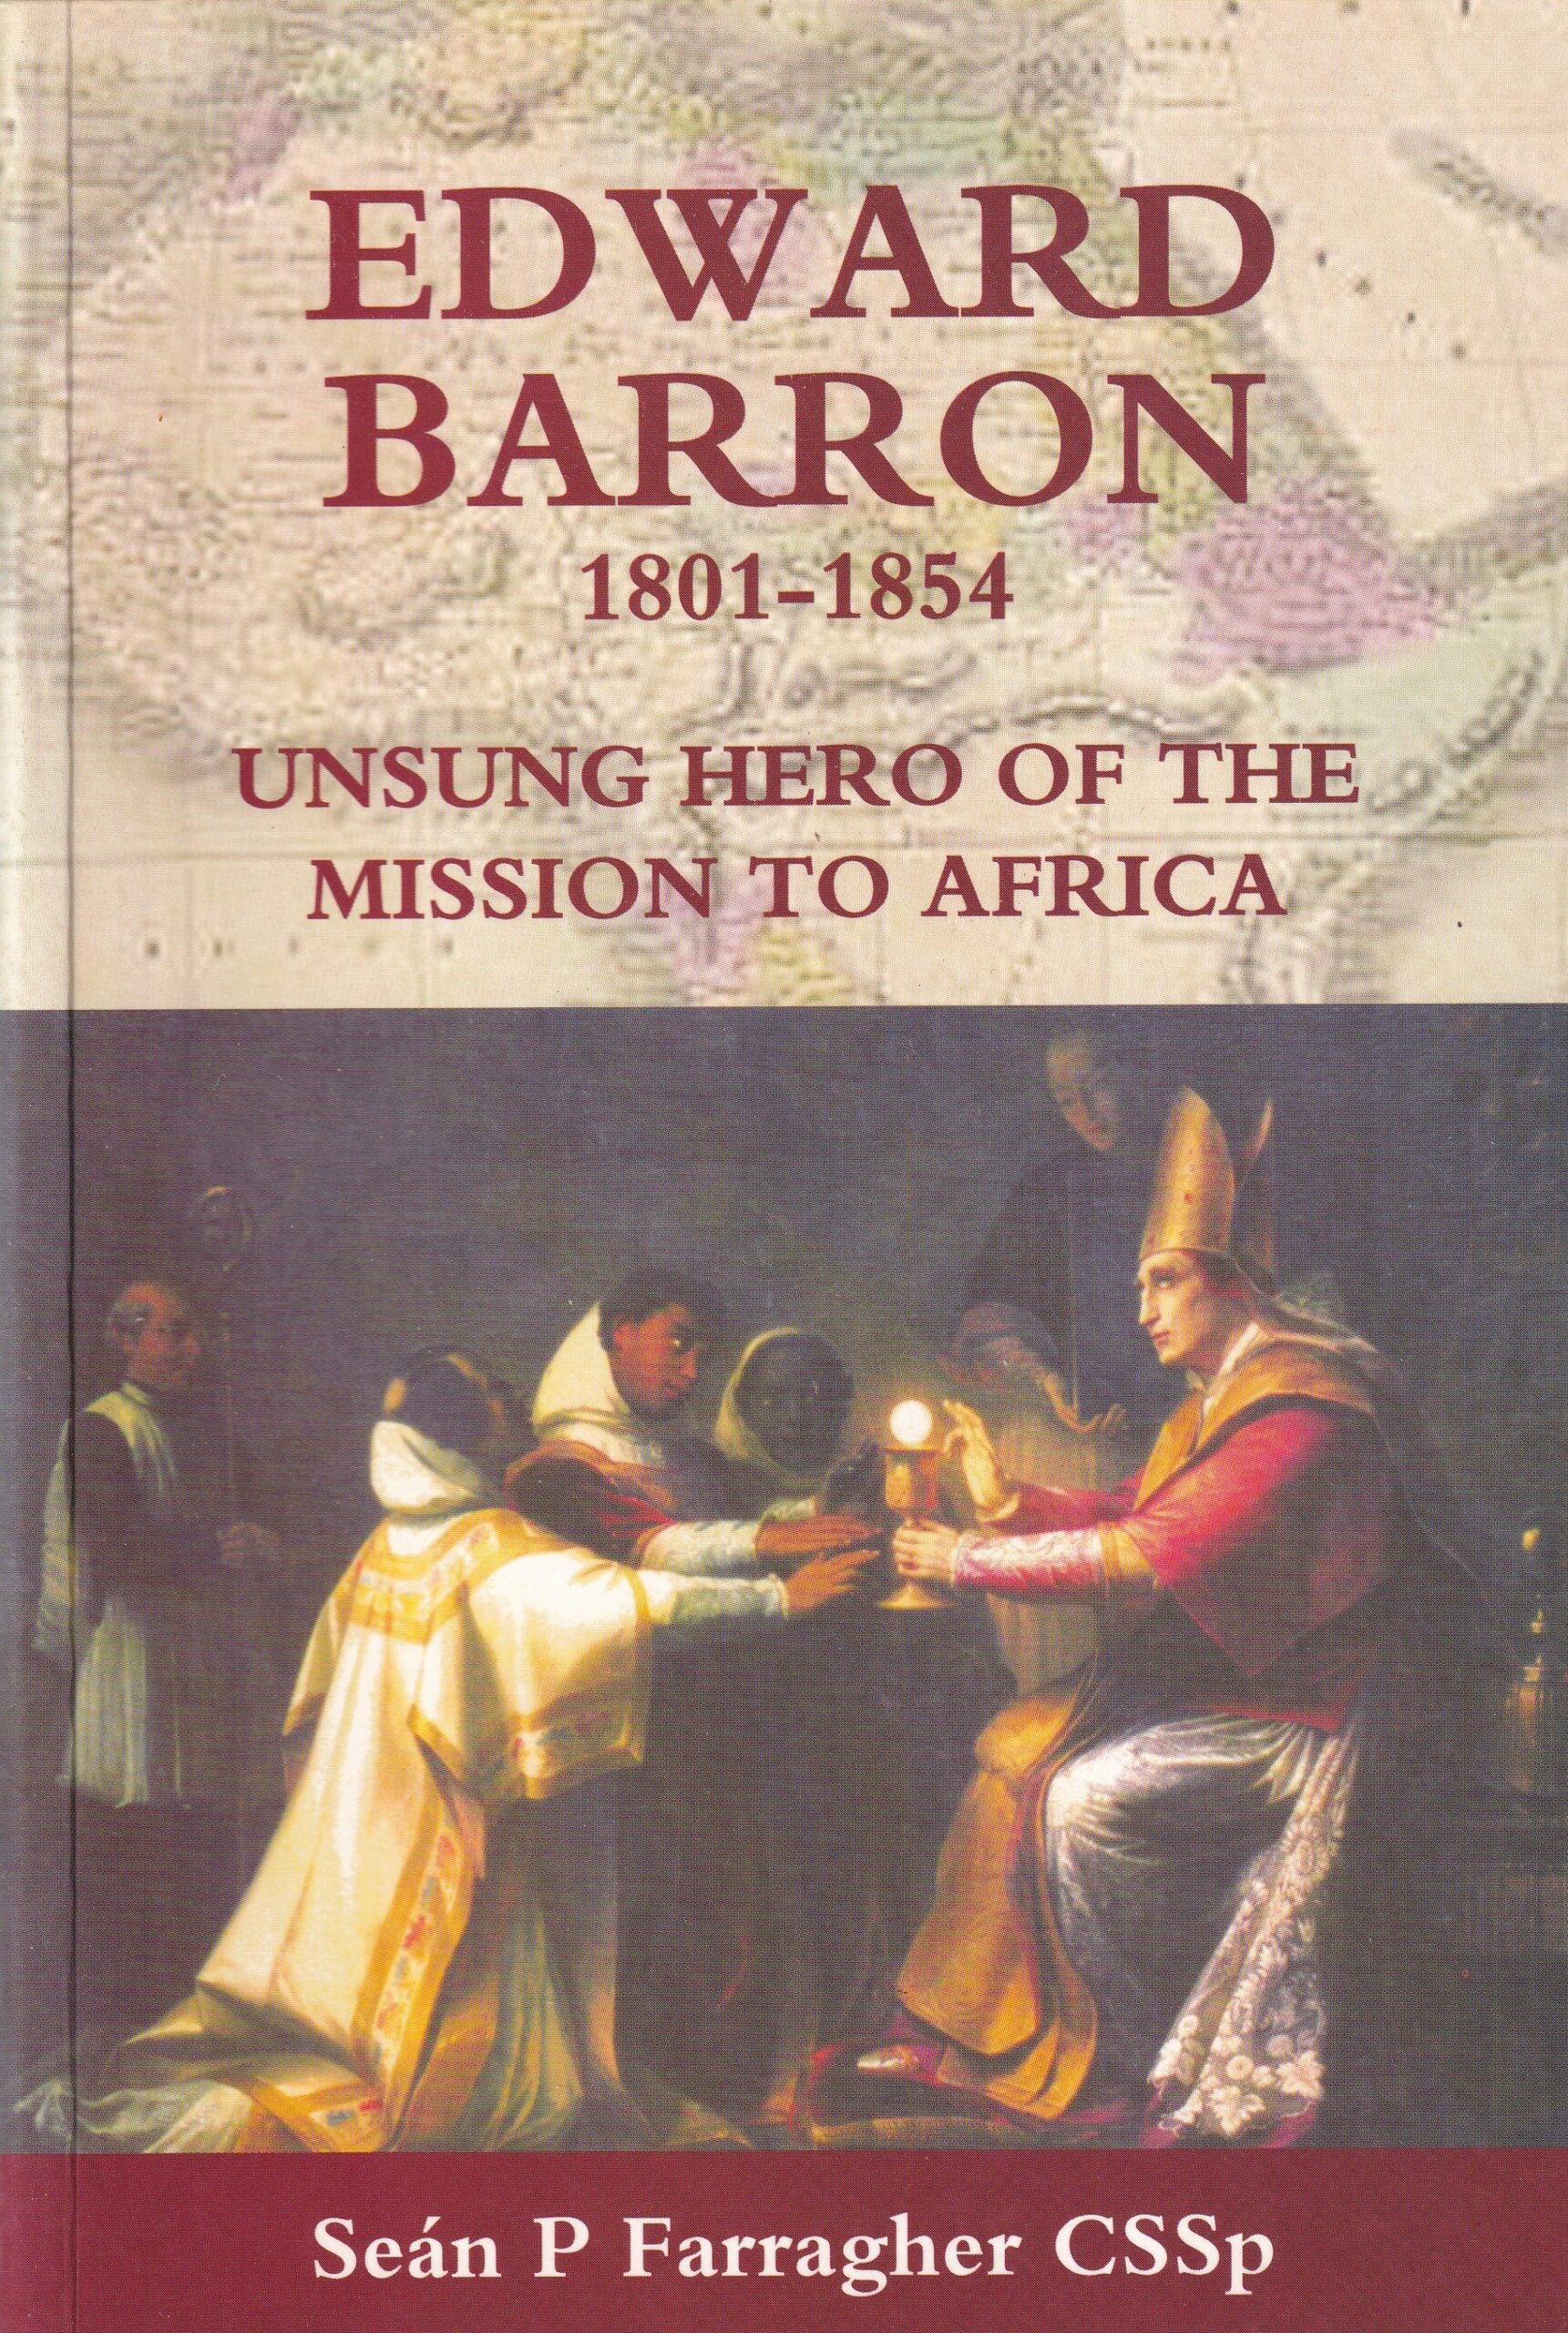 Edward Barron 1801-1854: Unsung Hero of the Mission to Africa | Seán P. Farragher | Charlie Byrne's